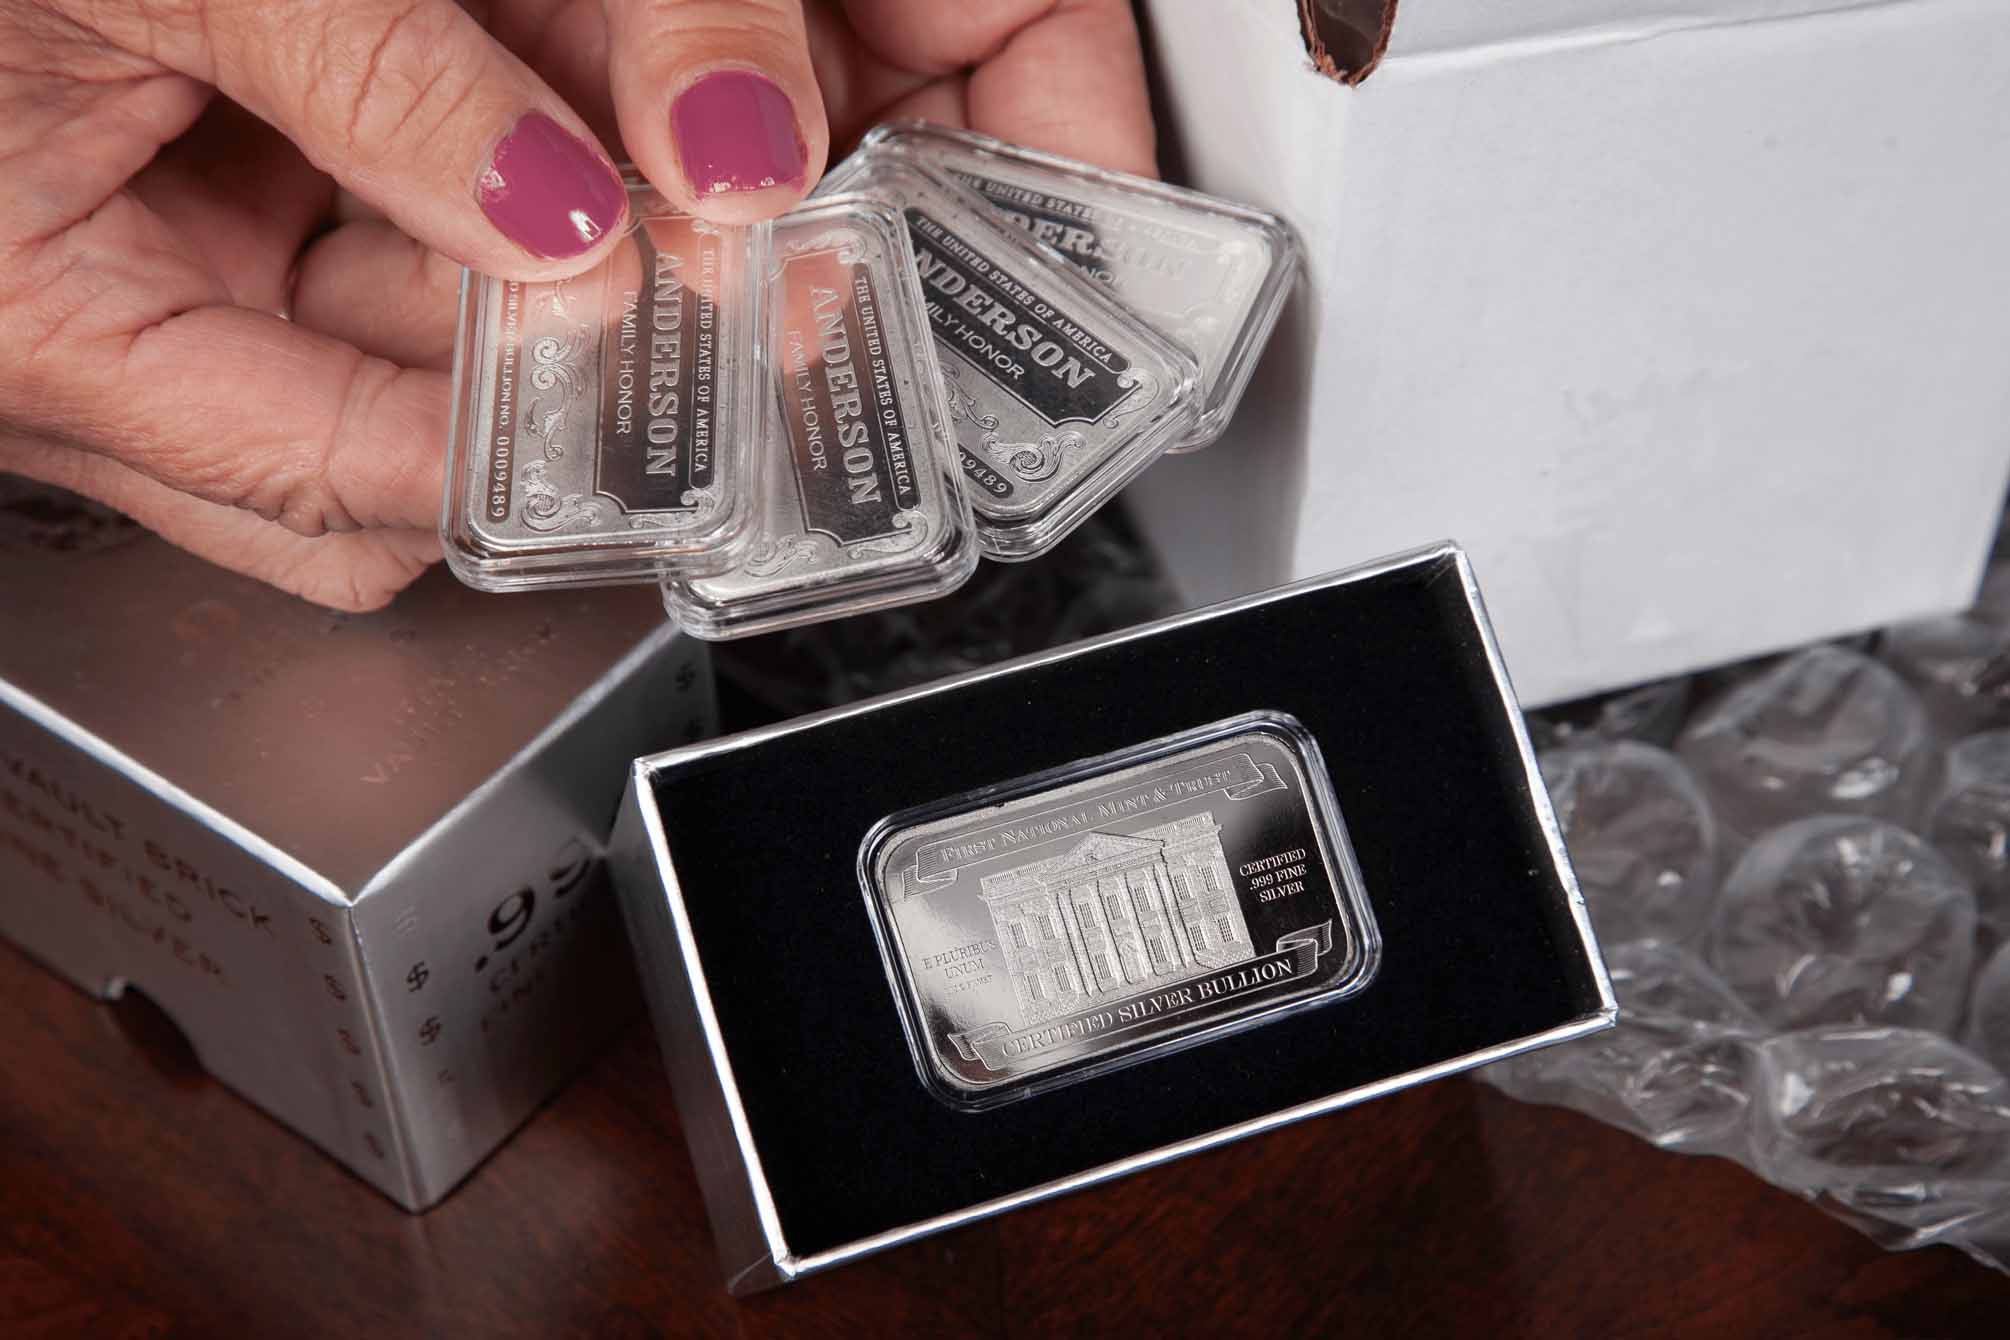 'Personalized Name' Family Honor Silver Bars Displayed in Hand, Certified .999 Fine Silver, First National Mint and Trust, Opening Packaging